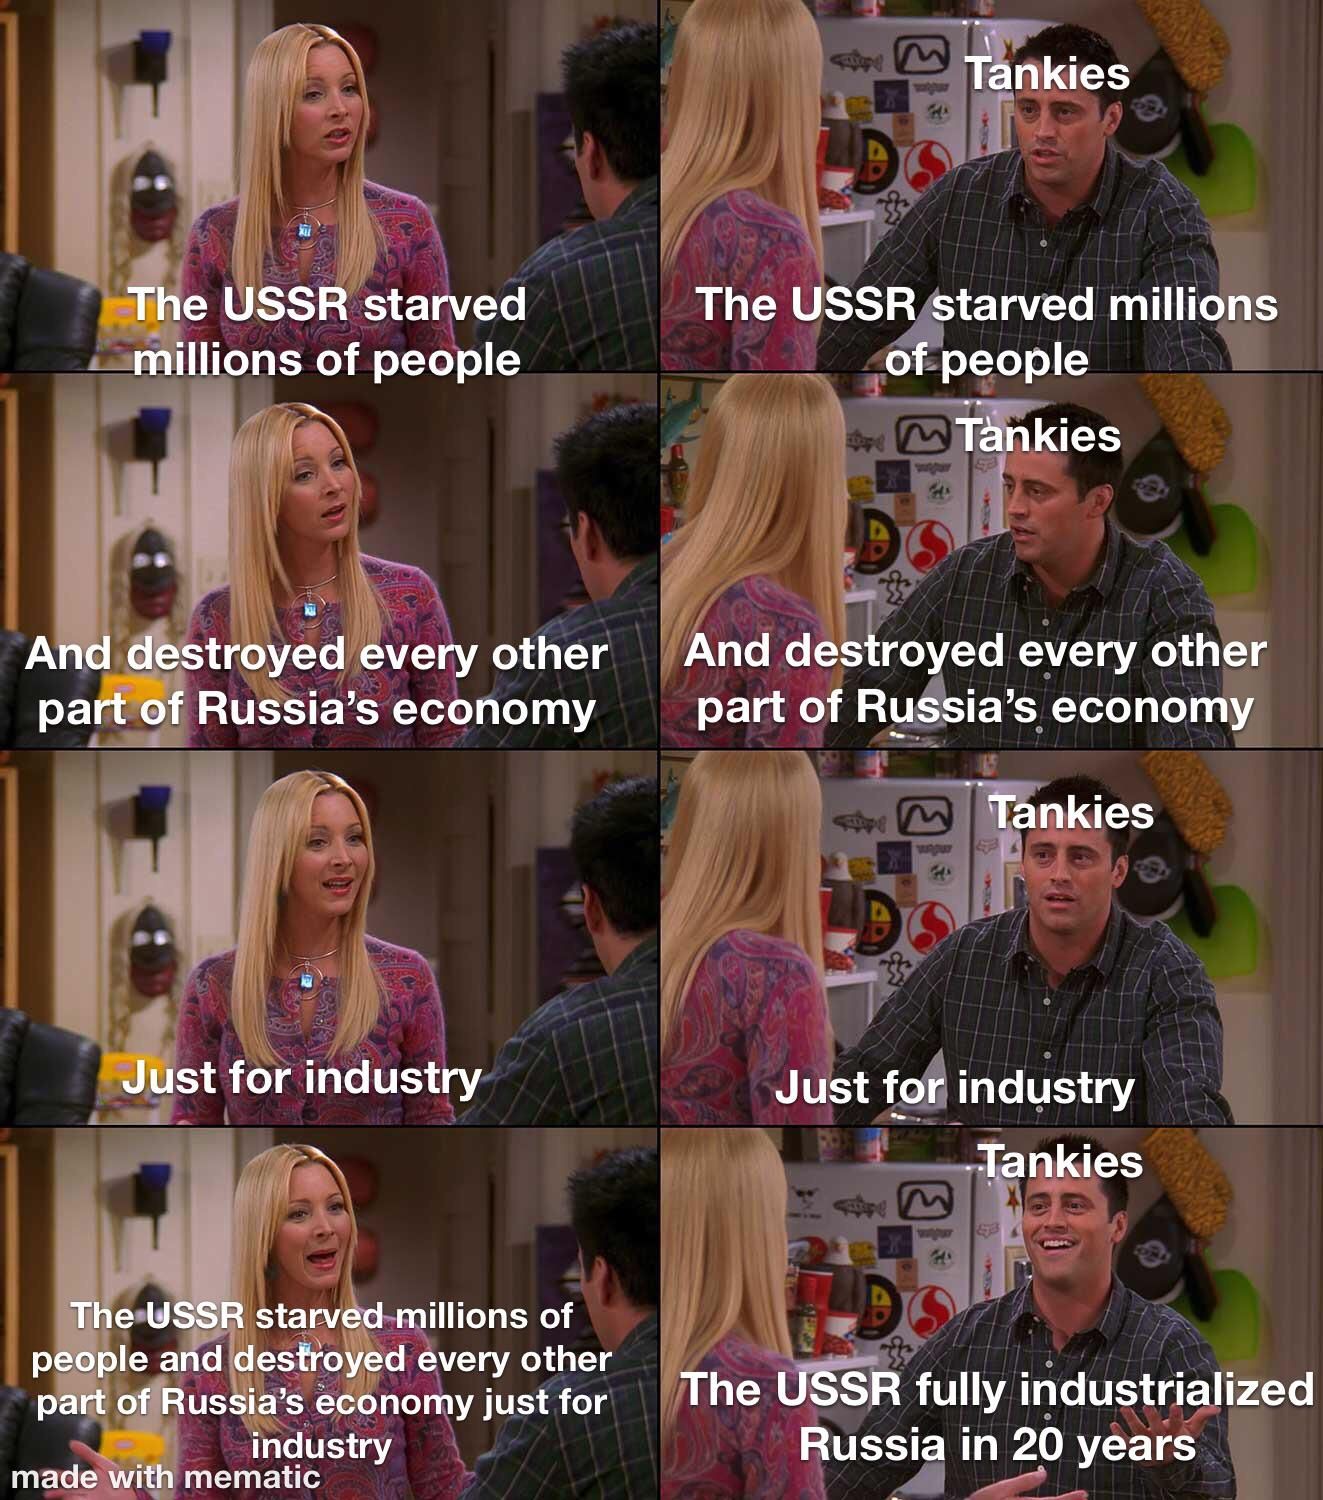 They did industrialize, but at great cost to Russia, both in lives and money